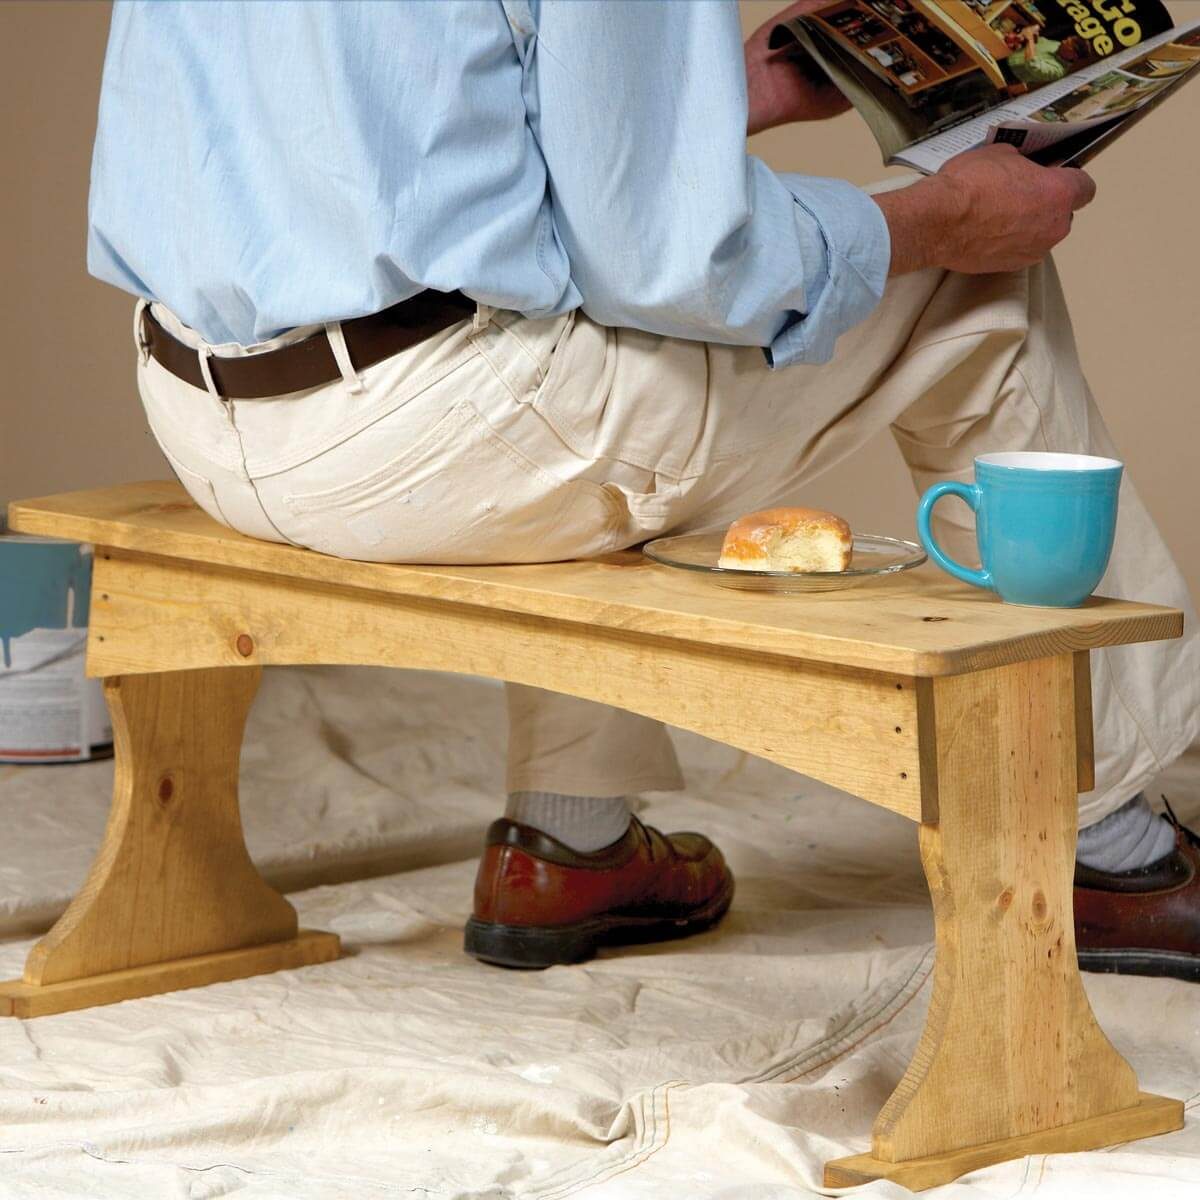 31 Indoor Woodworking Projects To Do This Winter